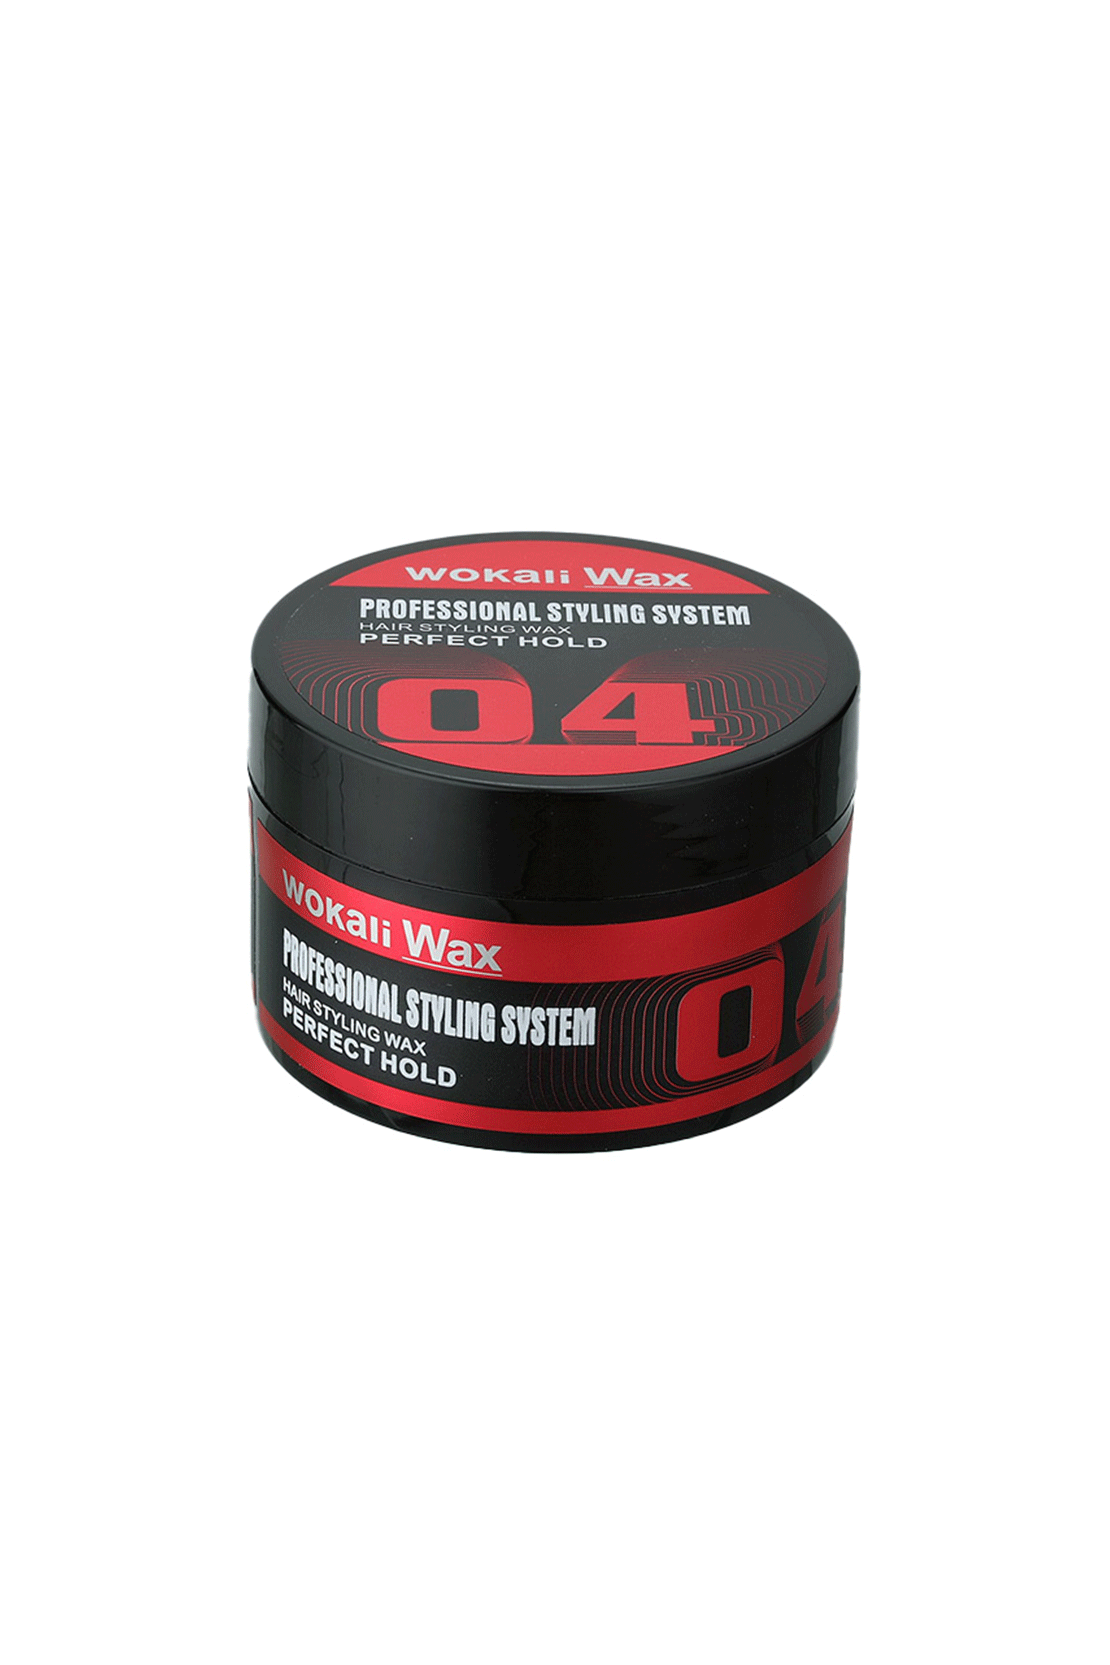 Perfect Hold Hair Styling Wax 150g RIOS